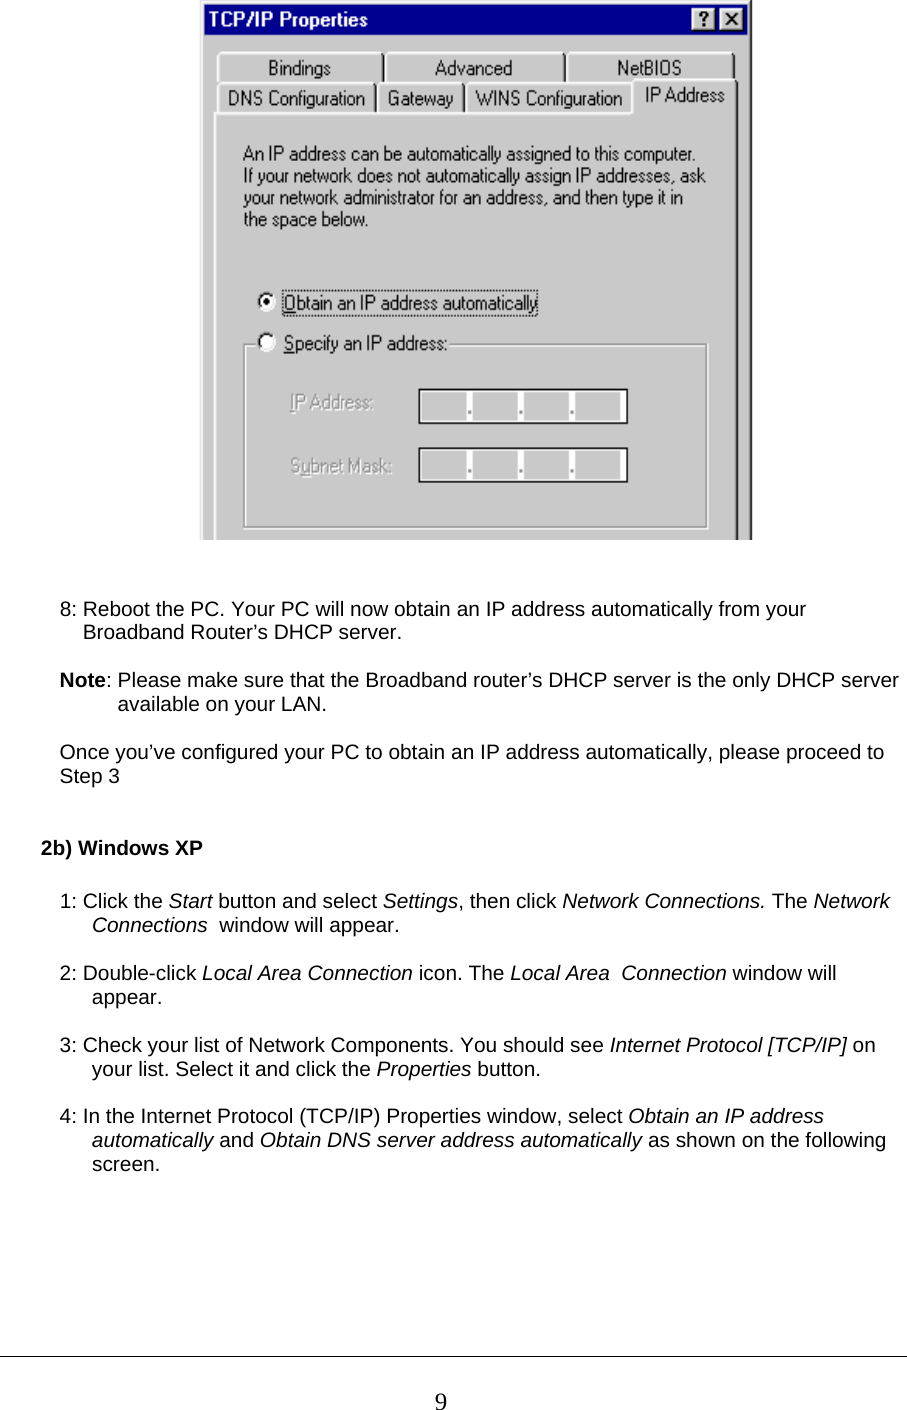    8: Reboot the PC. Your PC will now obtain an IP address automatically from your      Broadband Router’s DHCP server.  Note: Please make sure that the Broadband router’s DHCP server is the only DHCP server             available on your LAN.  Once you’ve configured your PC to obtain an IP address automatically, please proceed to  Step 3    2b) Windows XP  1: Click the Start button and select Settings, then click Network Connections. The Network Connections  window will appear.  2: Double-click Local Area Connection icon. The Local Area  Connection window will appear.  3: Check your list of Network Components. You should see Internet Protocol [TCP/IP] on your list. Select it and click the Properties button.  4: In the Internet Protocol (TCP/IP) Properties window, select Obtain an IP address automatically and Obtain DNS server address automatically as shown on the following screen.   9